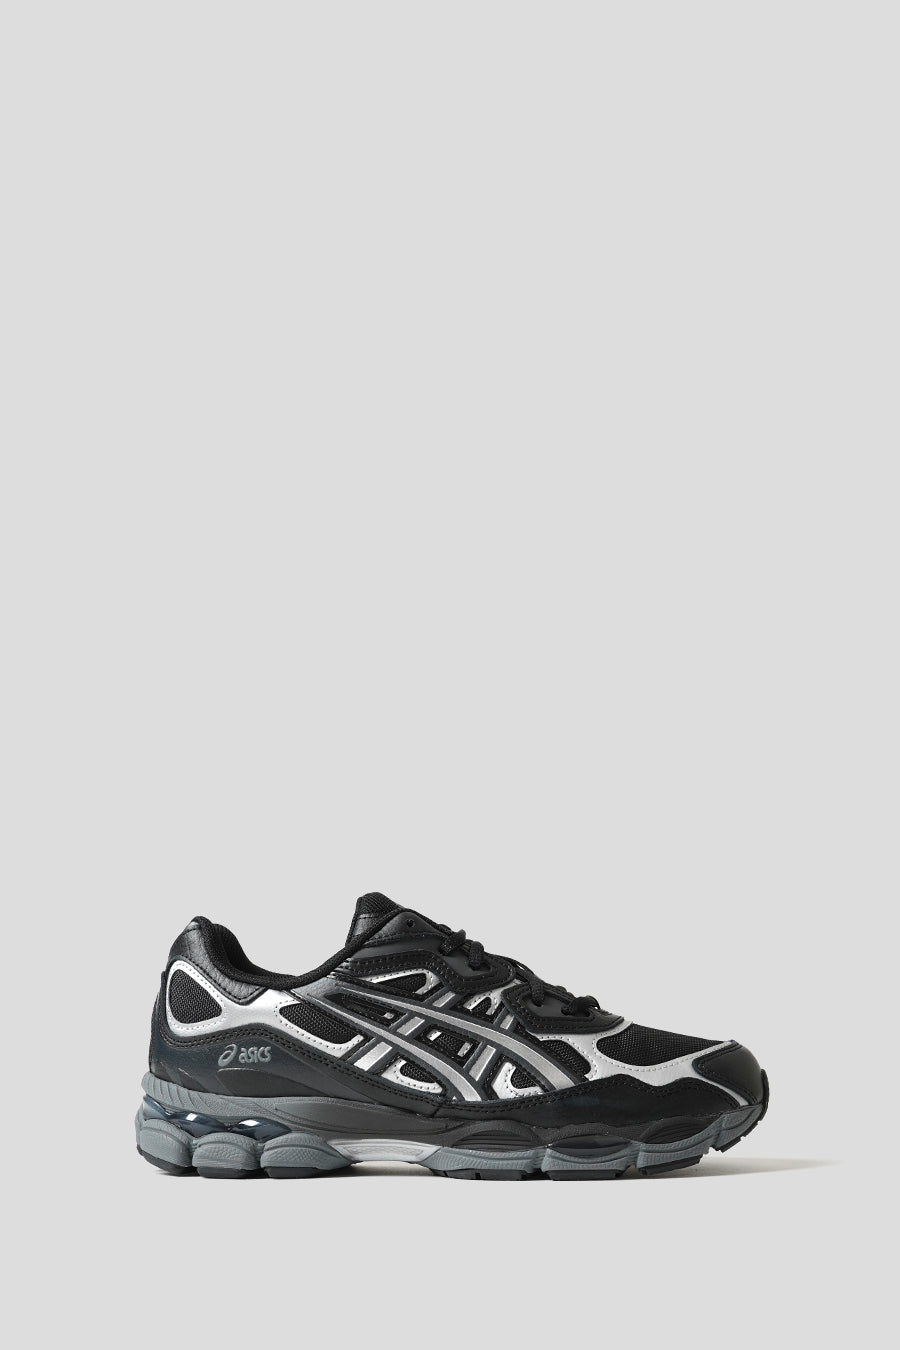 Asics - BLACK AND GRAPHITE GREY GEL-NYC SNEAKERS - LE LABO STORE